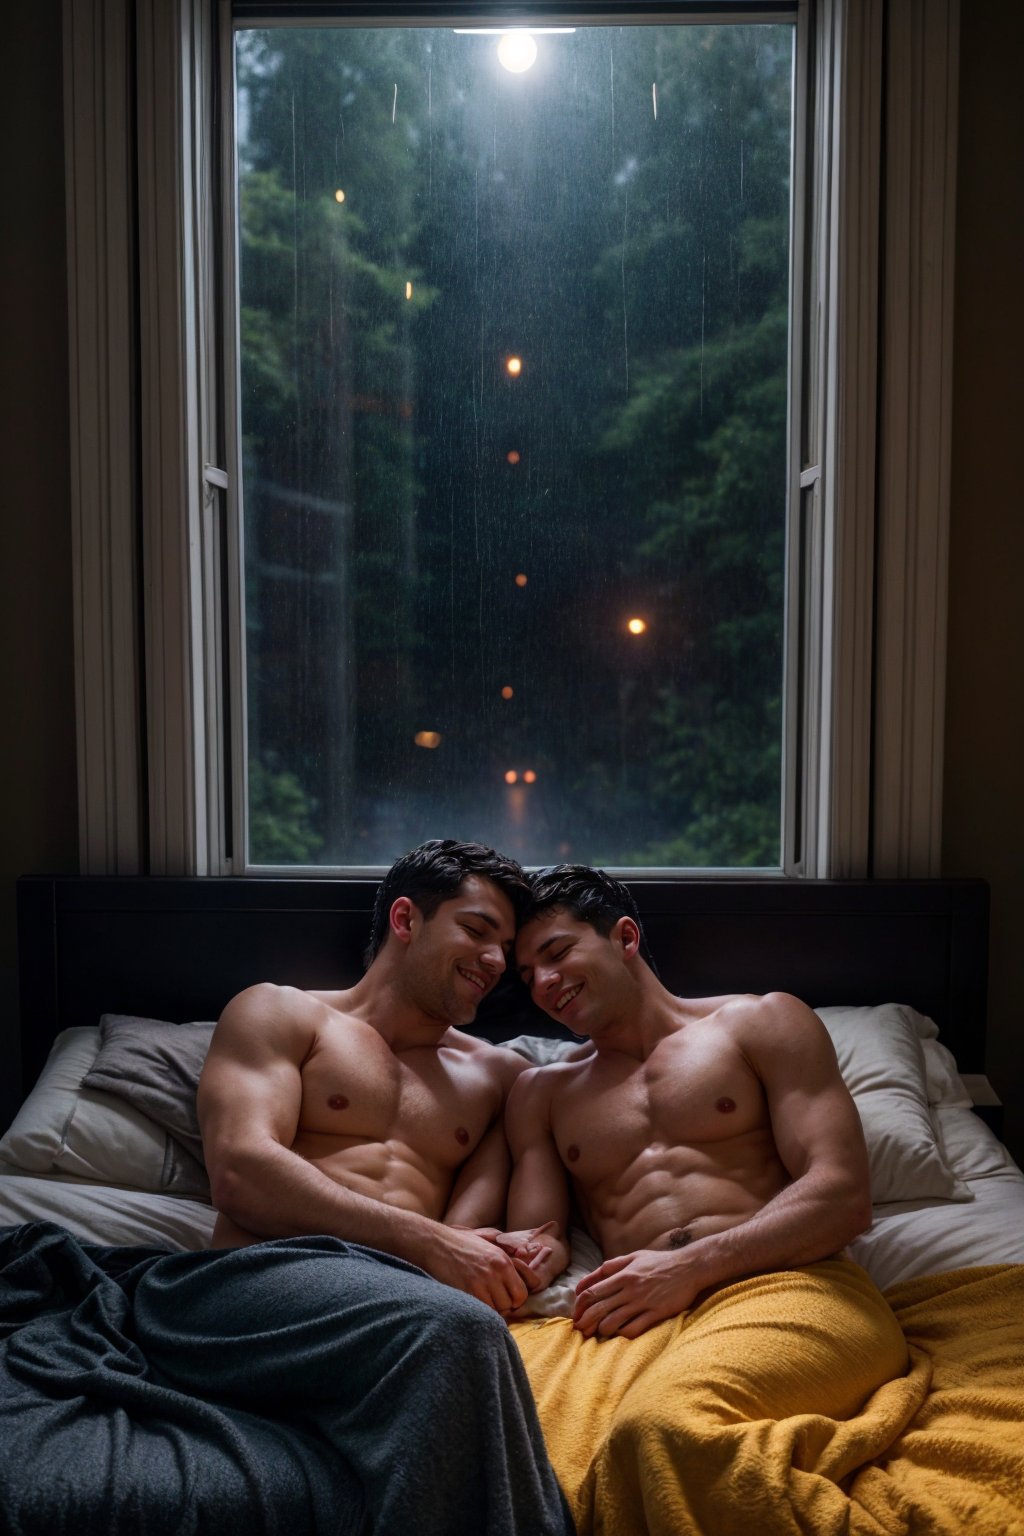 Generate a heartwarming and cinematic bedroom scene. In a cozy and tastefully decorated bedroom with soft, dimmed lighting, two loving men, Alex and James, are peacefully sleeping side by side in a king-sized bed adorned with plush blankets and pillows. The rain is gently tapping against the windowpane, creating a soothing ambiance. Capture the scene from a slightly elevated angle, allowing the viewer to appreciate the tenderness of their embrace and the affectionate smiles on their faces as they dream together on this rainy night. Convey the warmth and intimacy of their relationship, the comfort of their shared space, and the tranquility of the rainy evening outside, (night:1.4), fog, condensation, (muted color:1.3), (dark atmosphere:1.5), pectorals, realistic, masterpiece, intricate details, detailed background, depth of field,